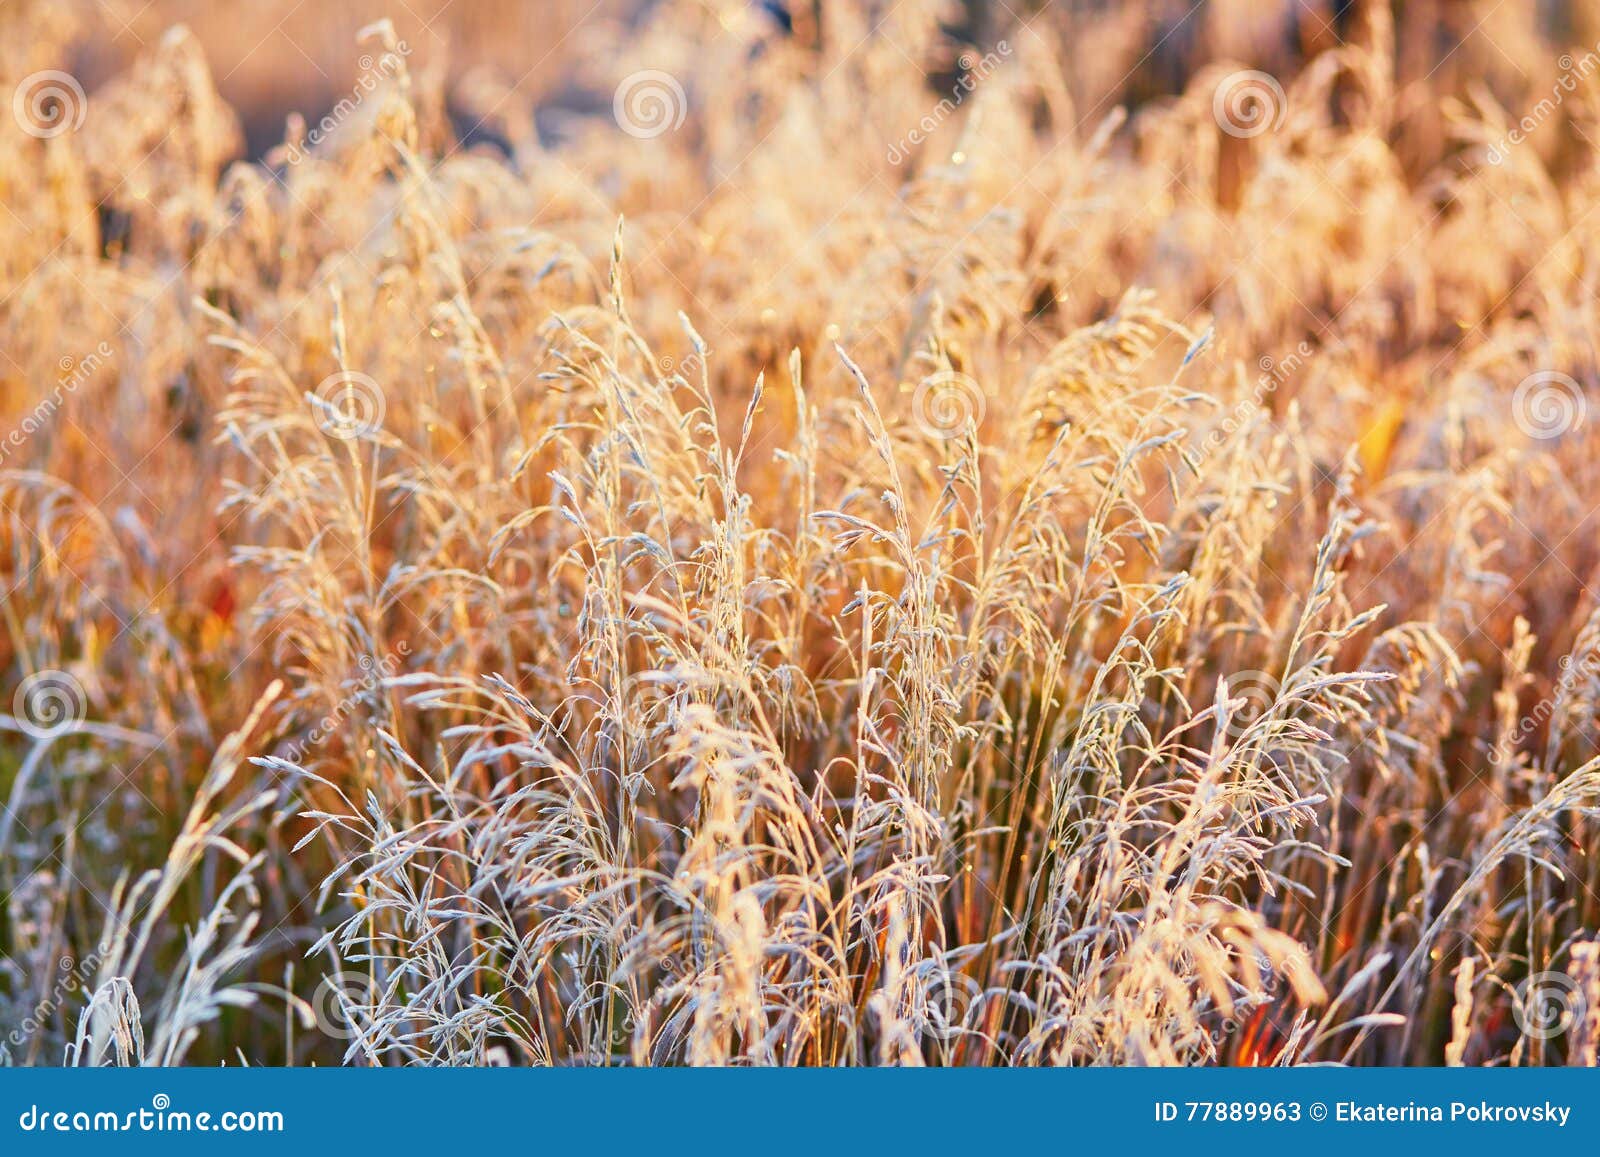 Beautiful Golden Grass Field at Sunset Stock Image - Image of colorful